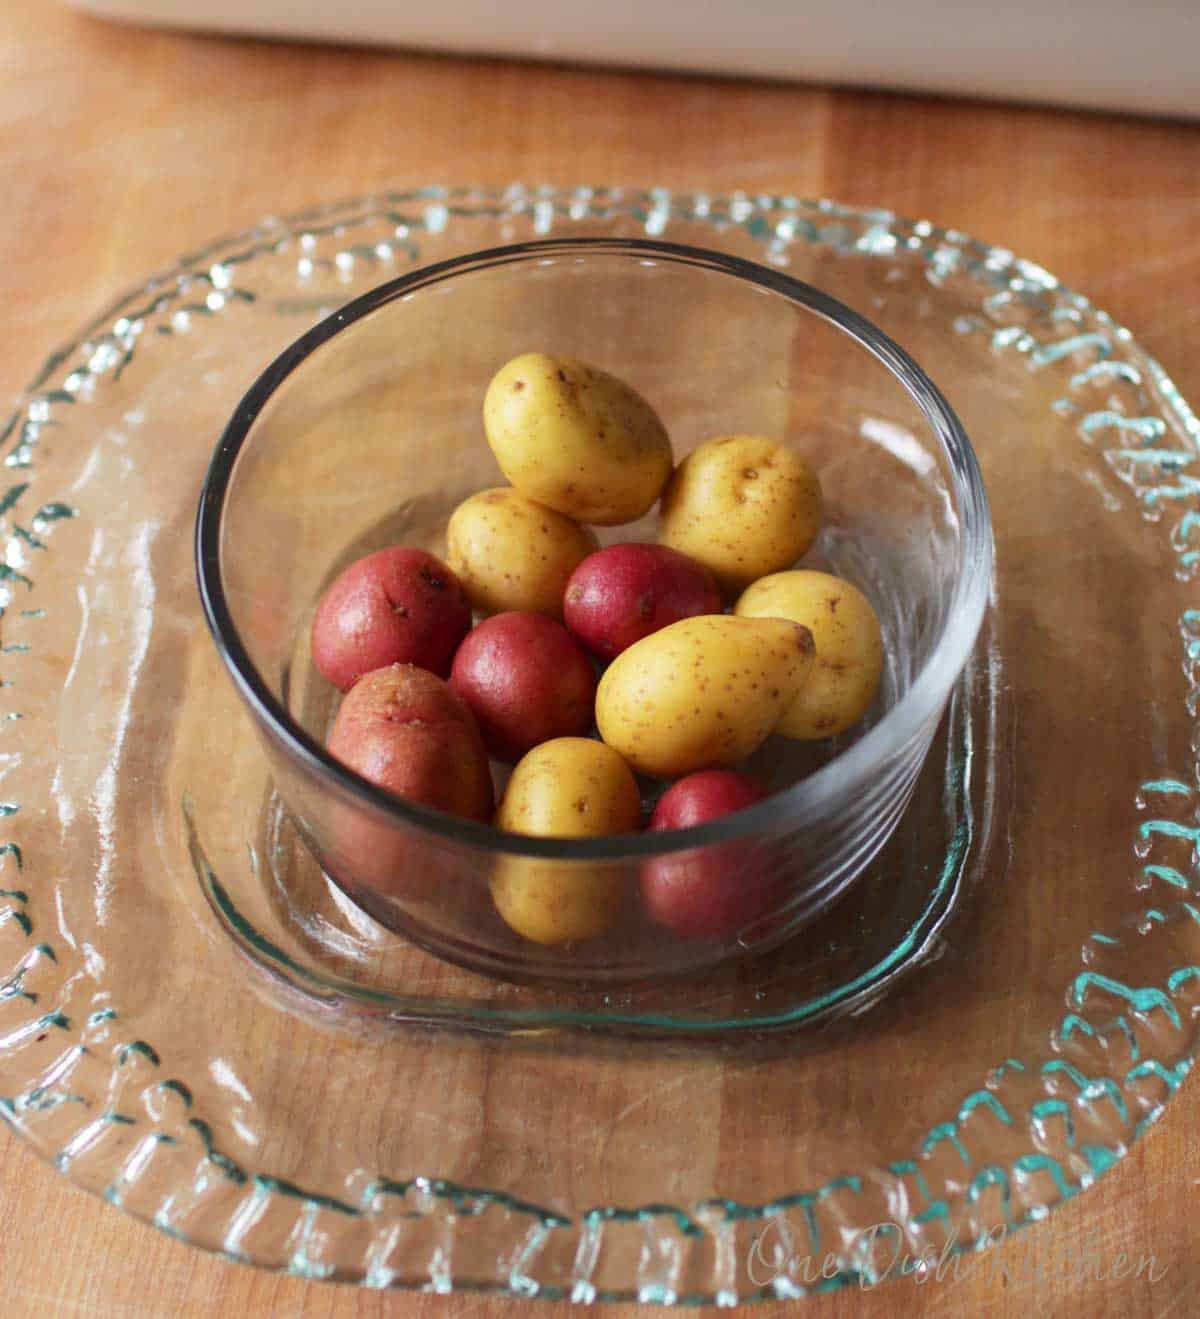 A small bowl of baby potatoes 